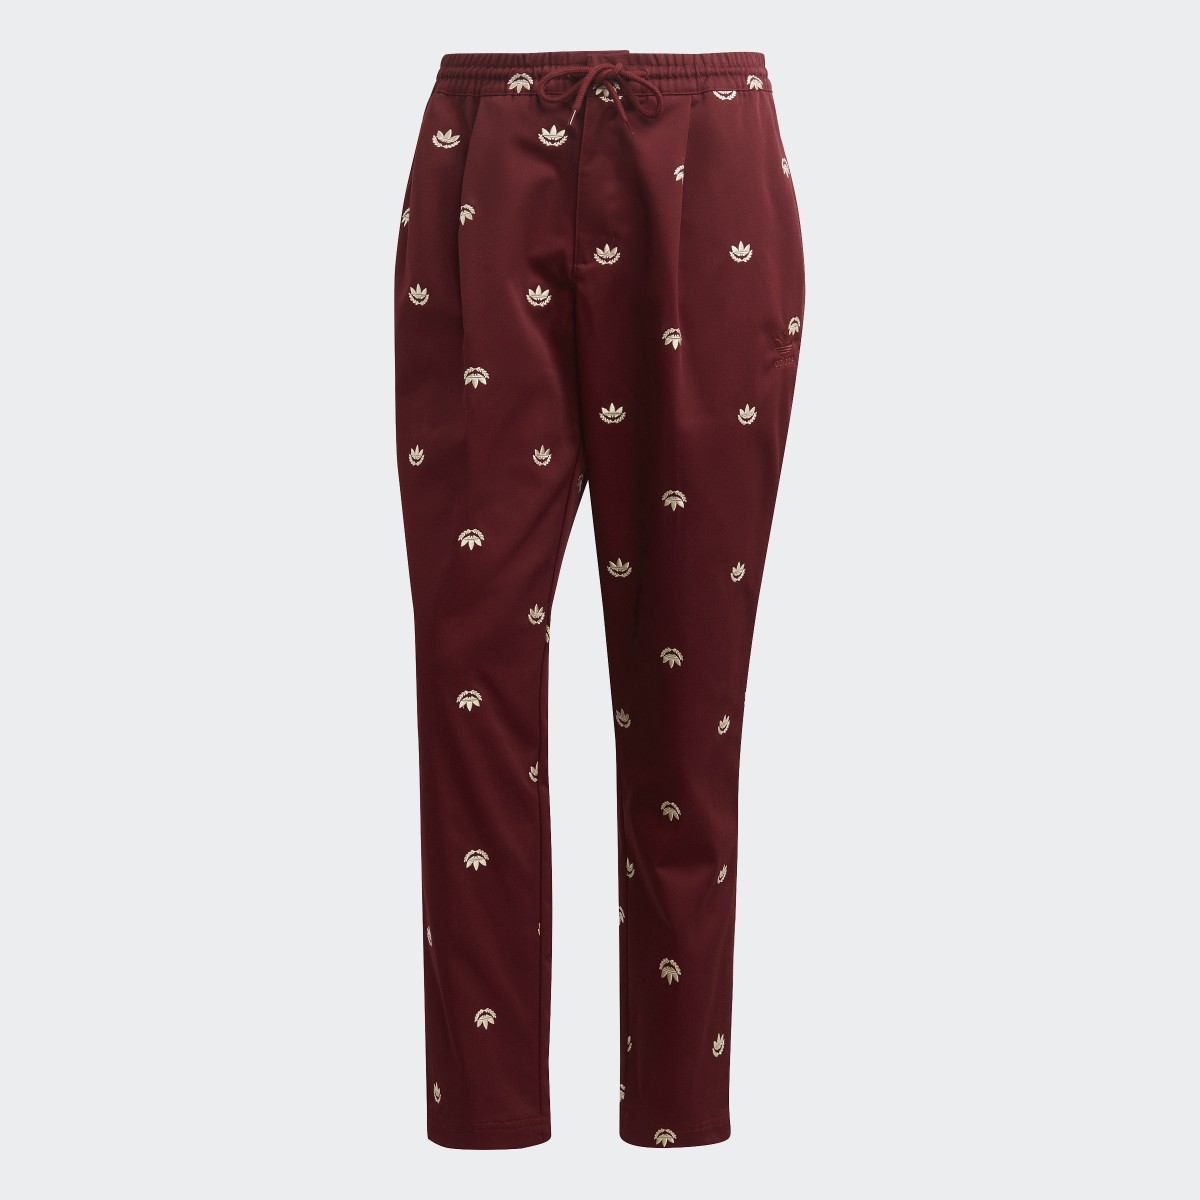 Adidas Graphics Archive Chino Trousers. 4